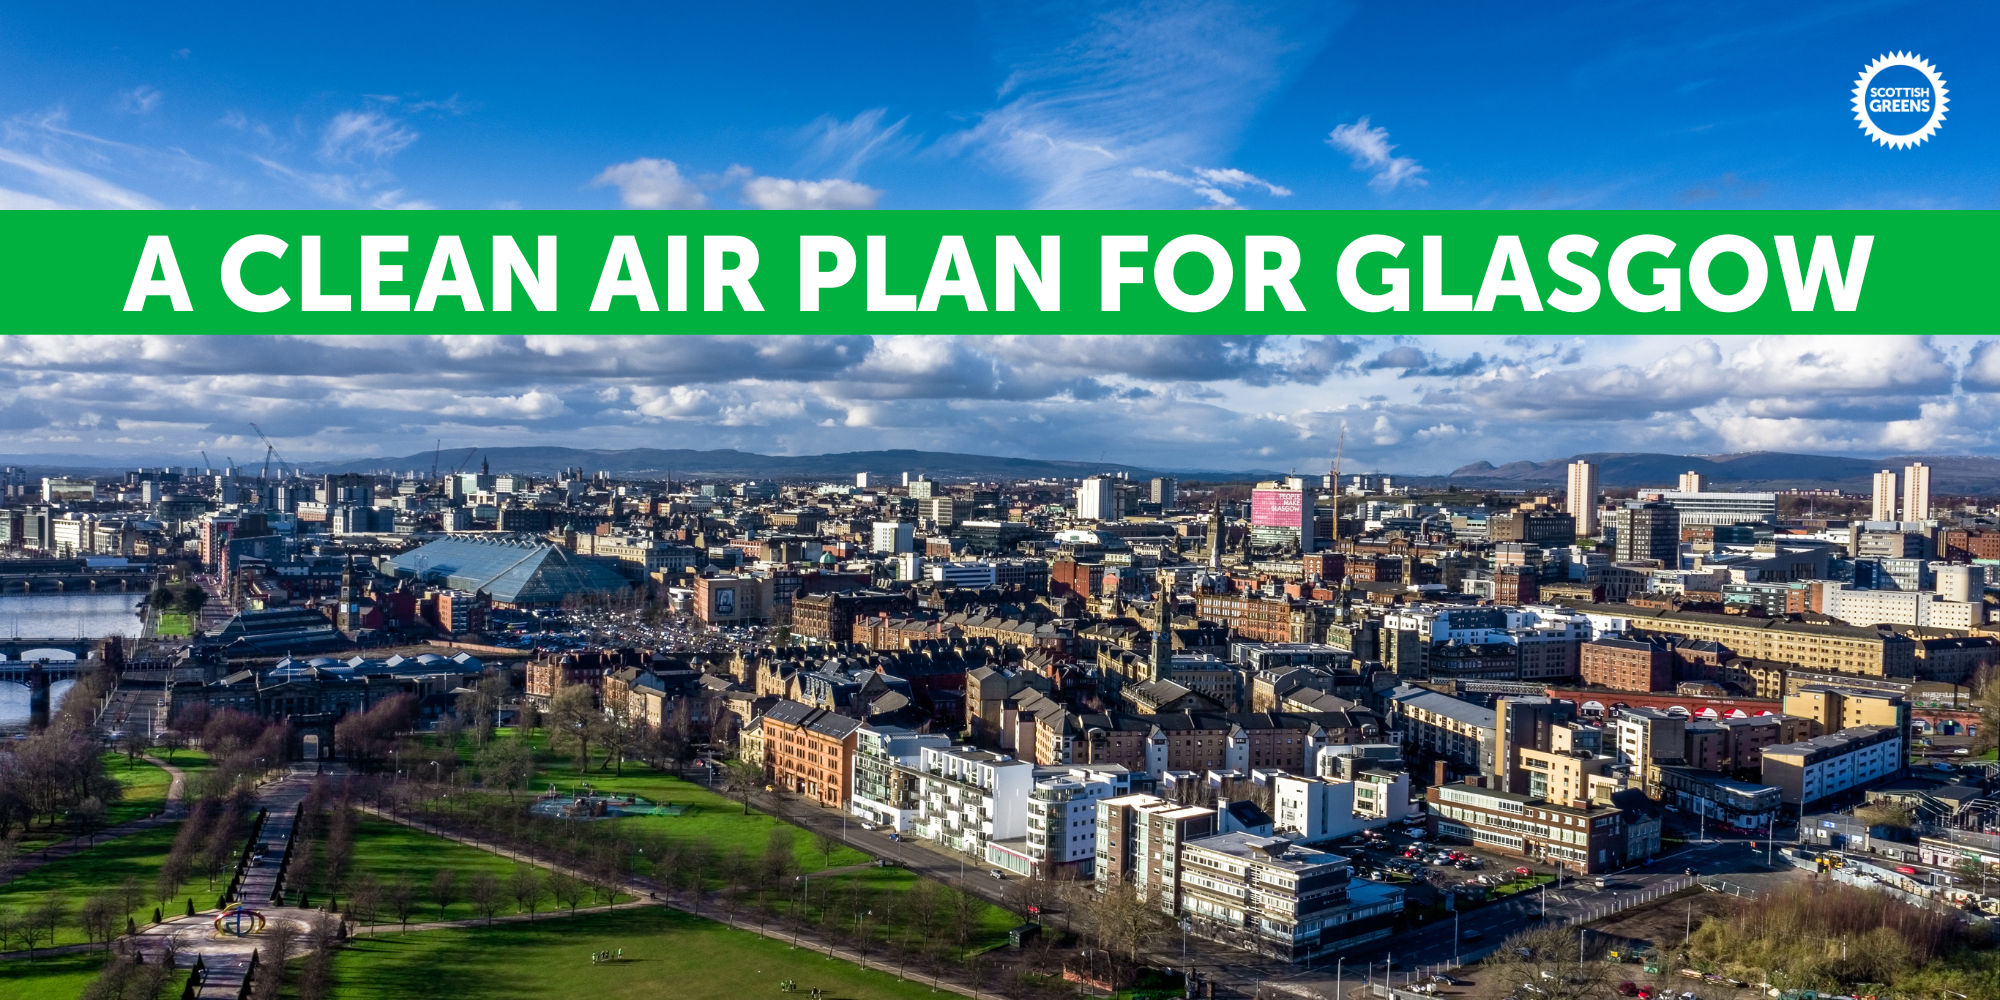 An image of Glasgow city scape, a Green band is overlayed horizontally across the image near the top and on it white text reads 'A clean air plan for Glasgow', in the top right corner is the Scottish Green party logo in white.